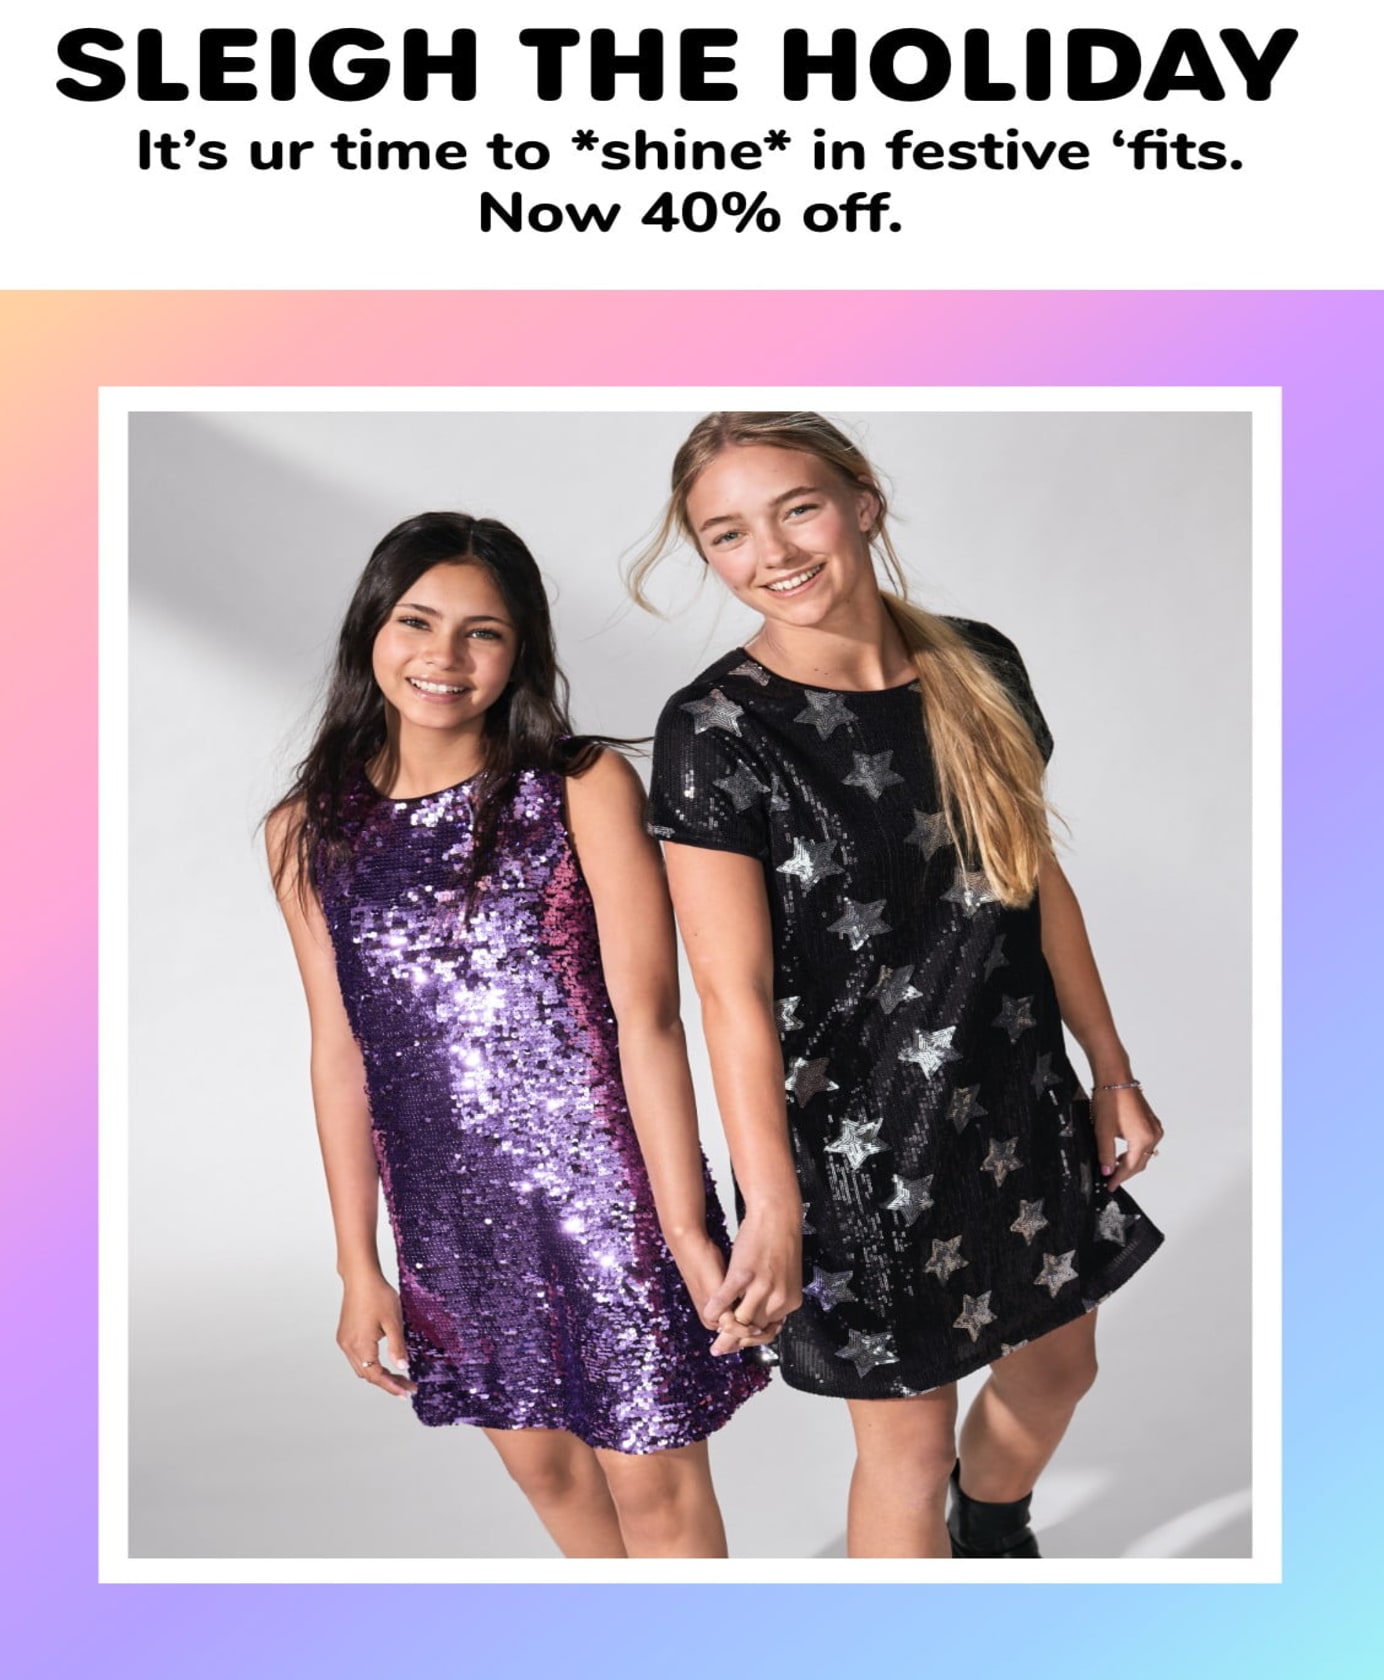 SLEIGH THE HOLIDAY It’s ur time to *shine* in festive ‘fits. Now 40% off.